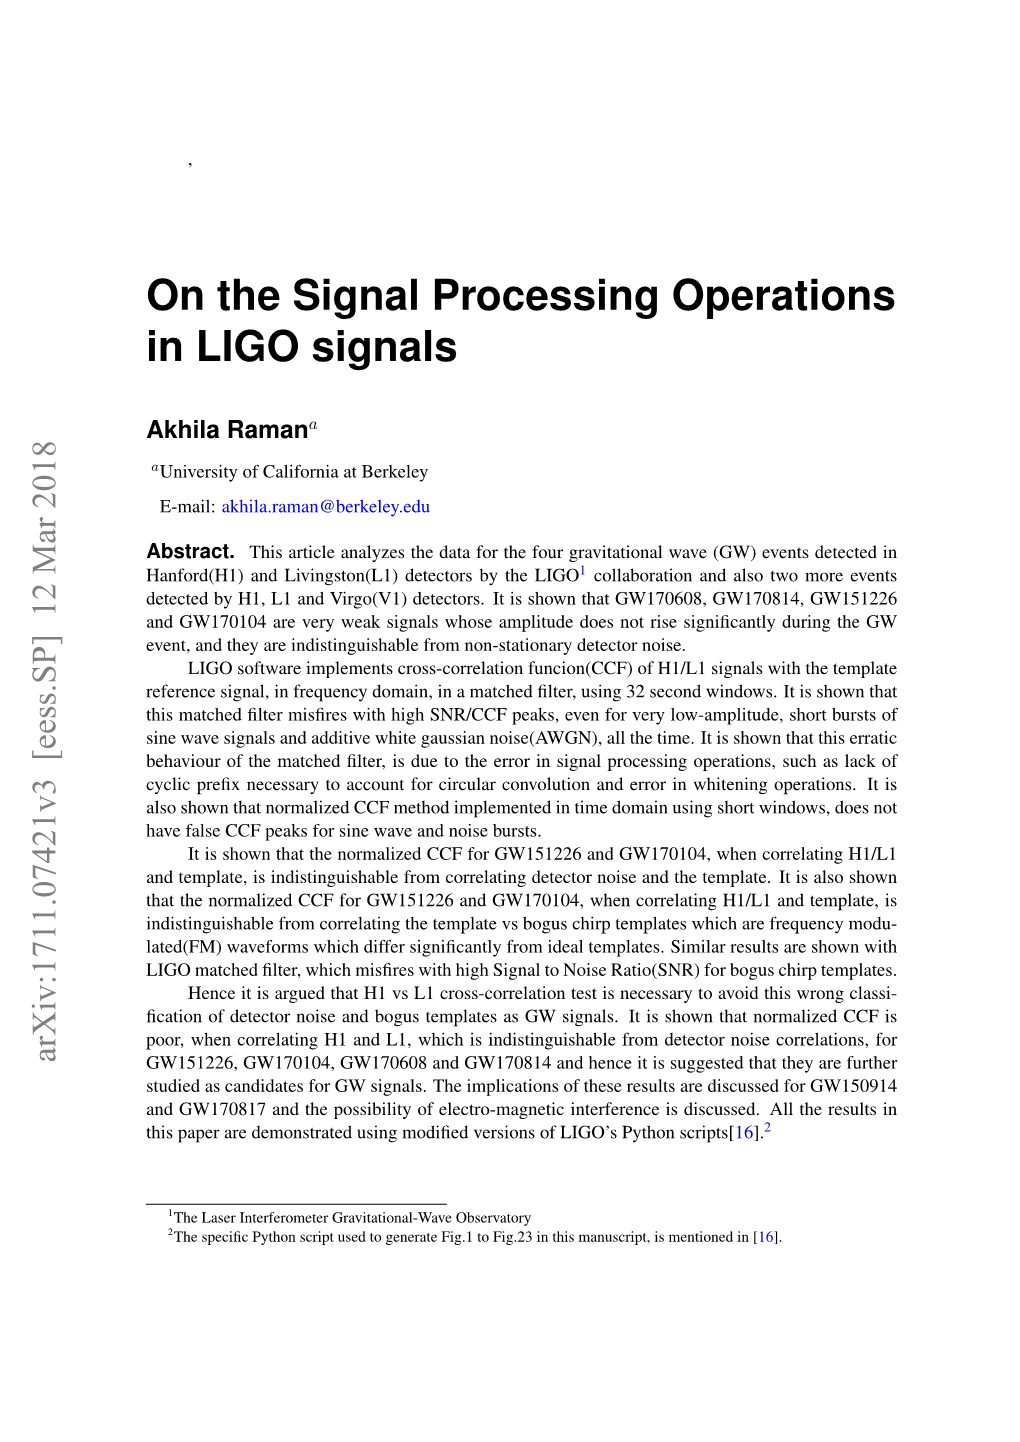 On the Signal Processing Operations in LIGO Signals